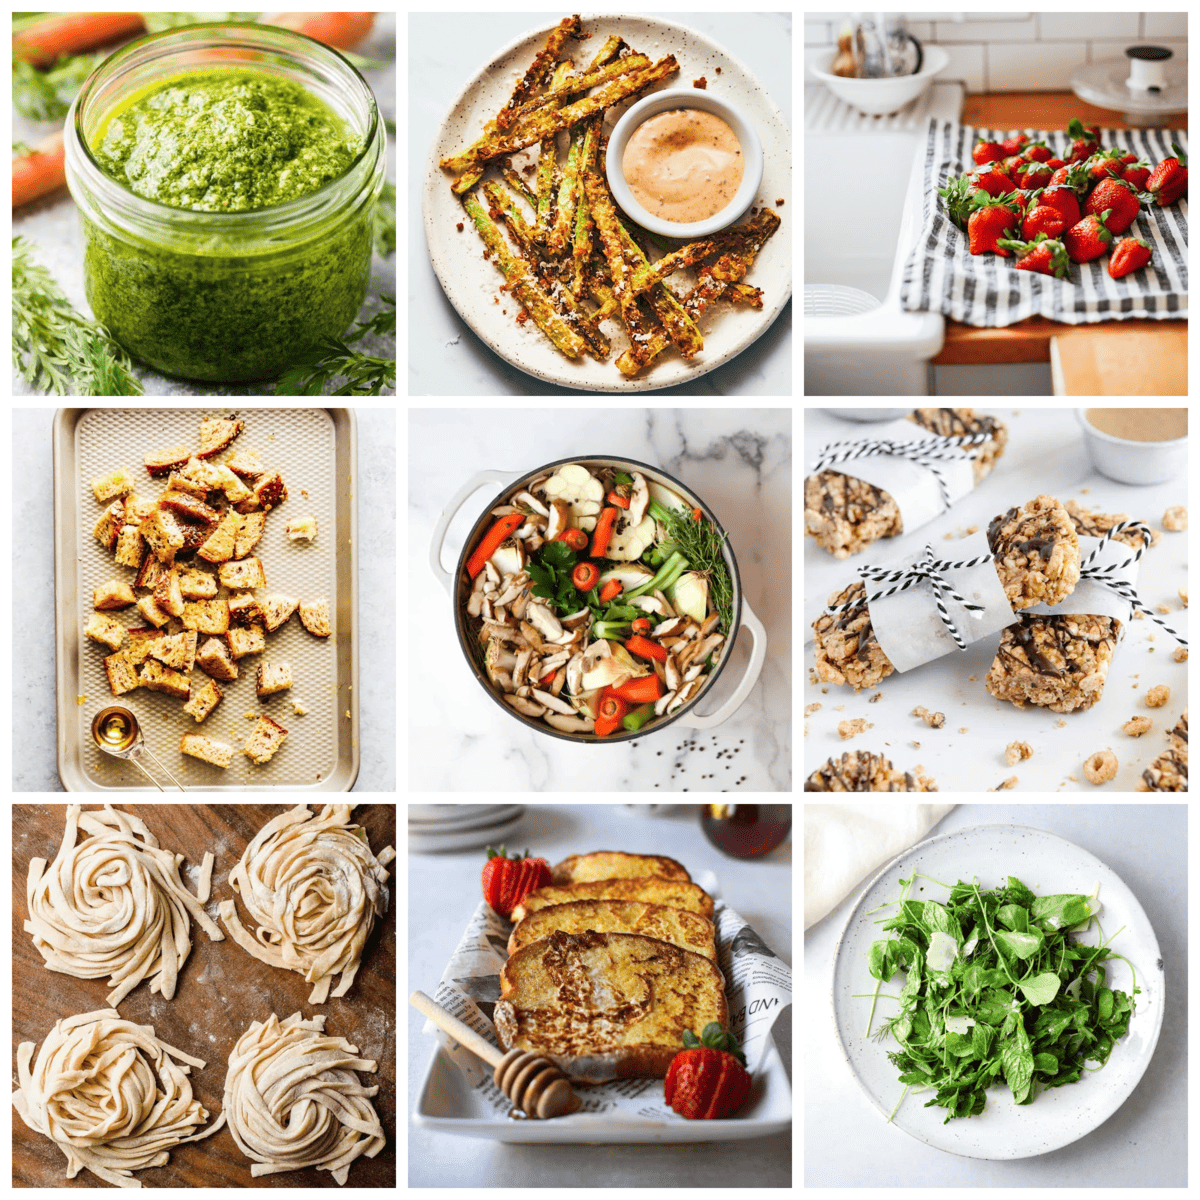 A collage of 9 sustainable recipes.